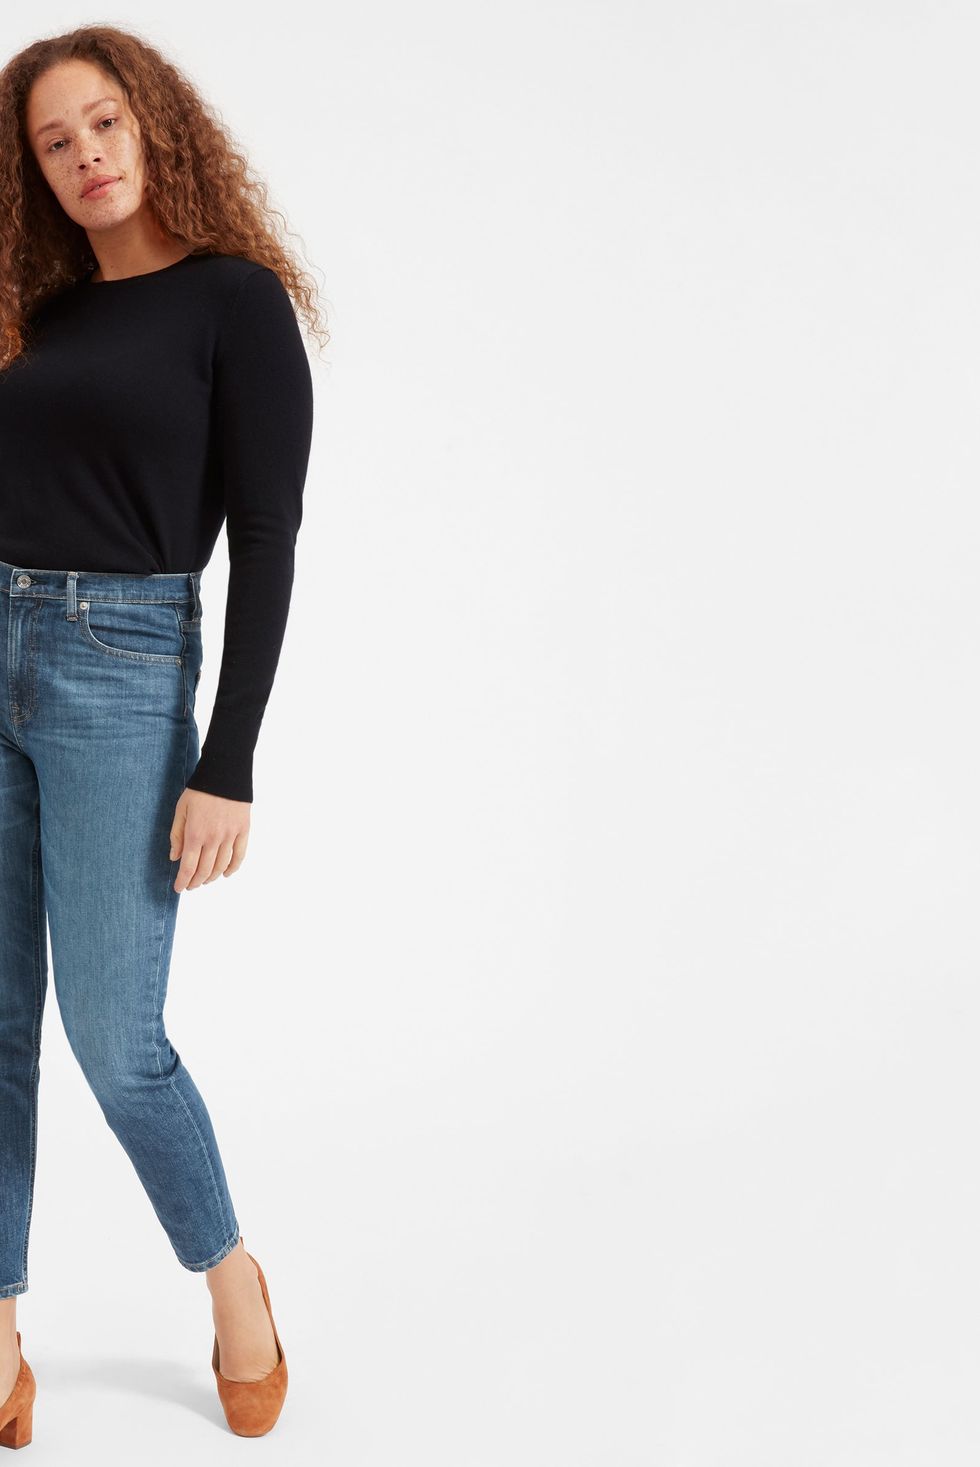 Everlane's Coveted Cashmere is Now On Sale for 'Choose What You Pay'